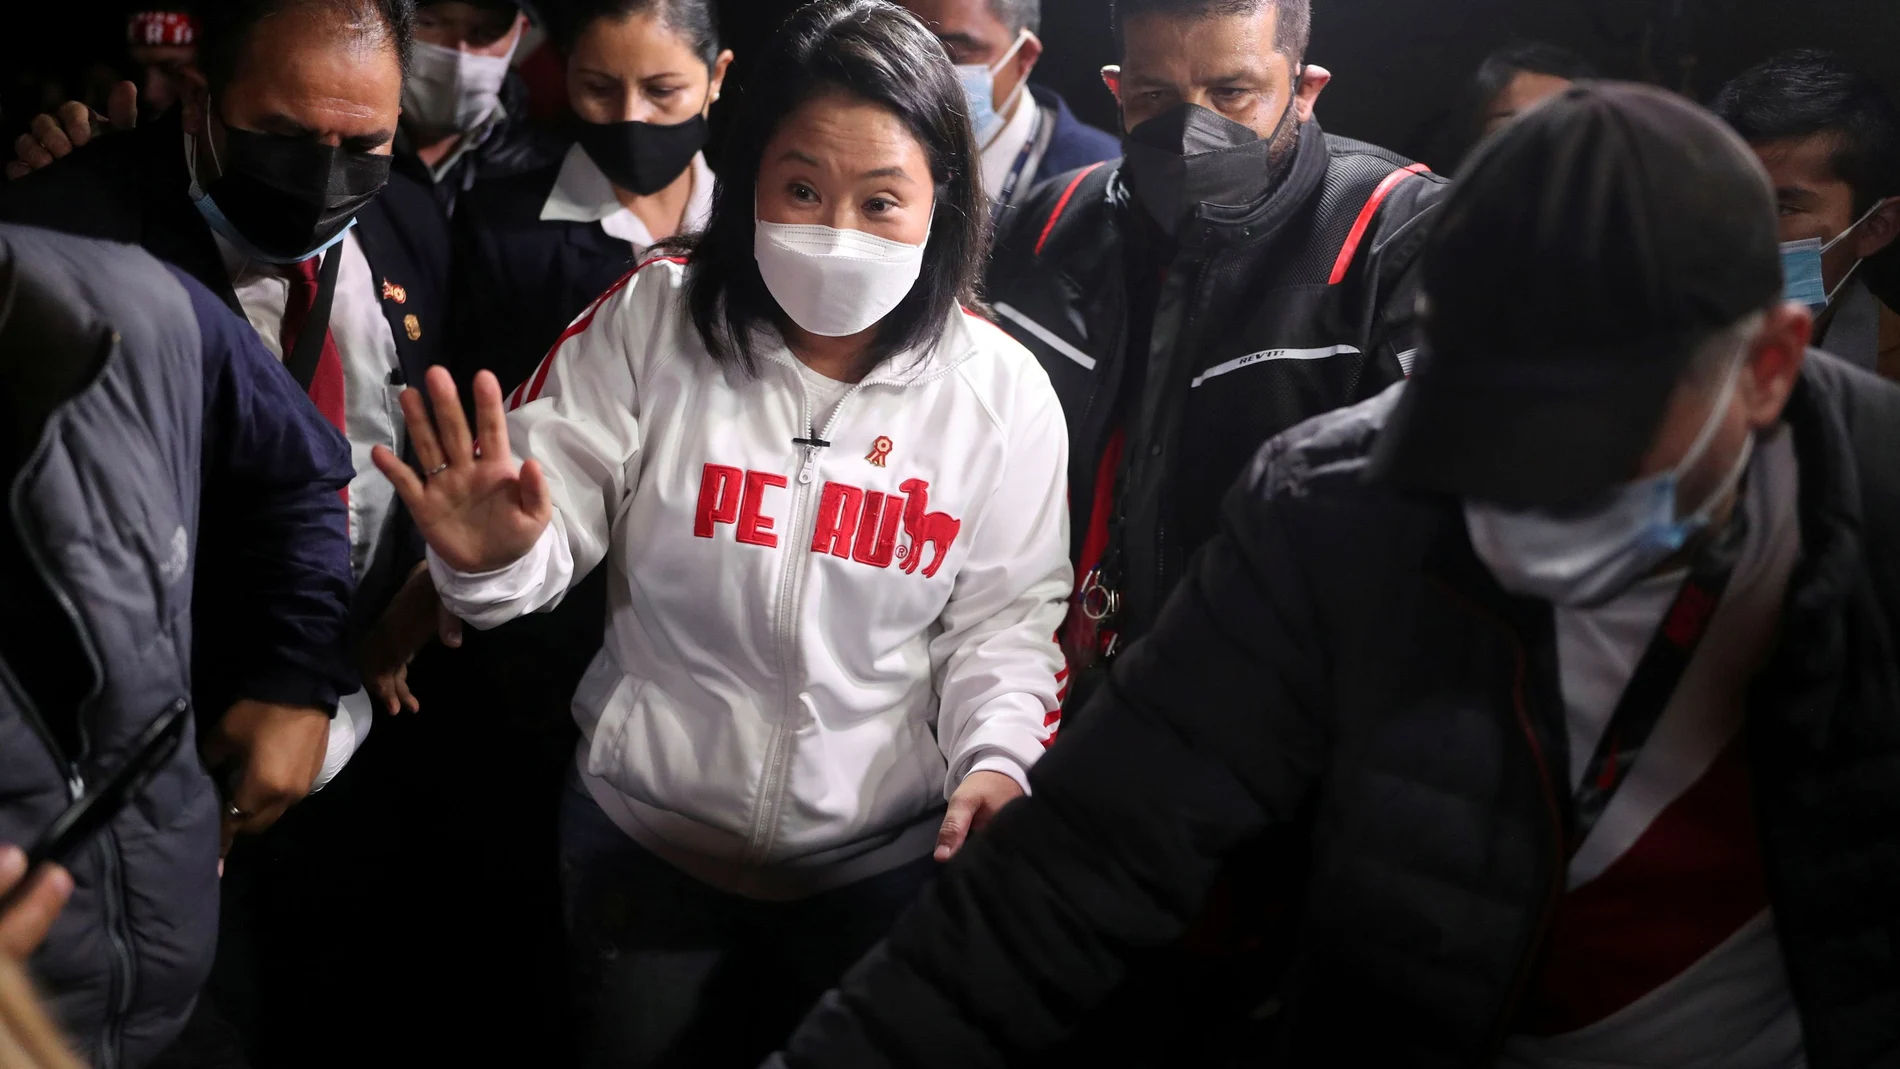 FILE PHOTO: Peru's presidential candidate Keiko Fujimori (C) arrives at a local beach to meet with supporters, in Lima, Peru July 7, 2021. REUTERS/Sebastian Castaneda/File Photo